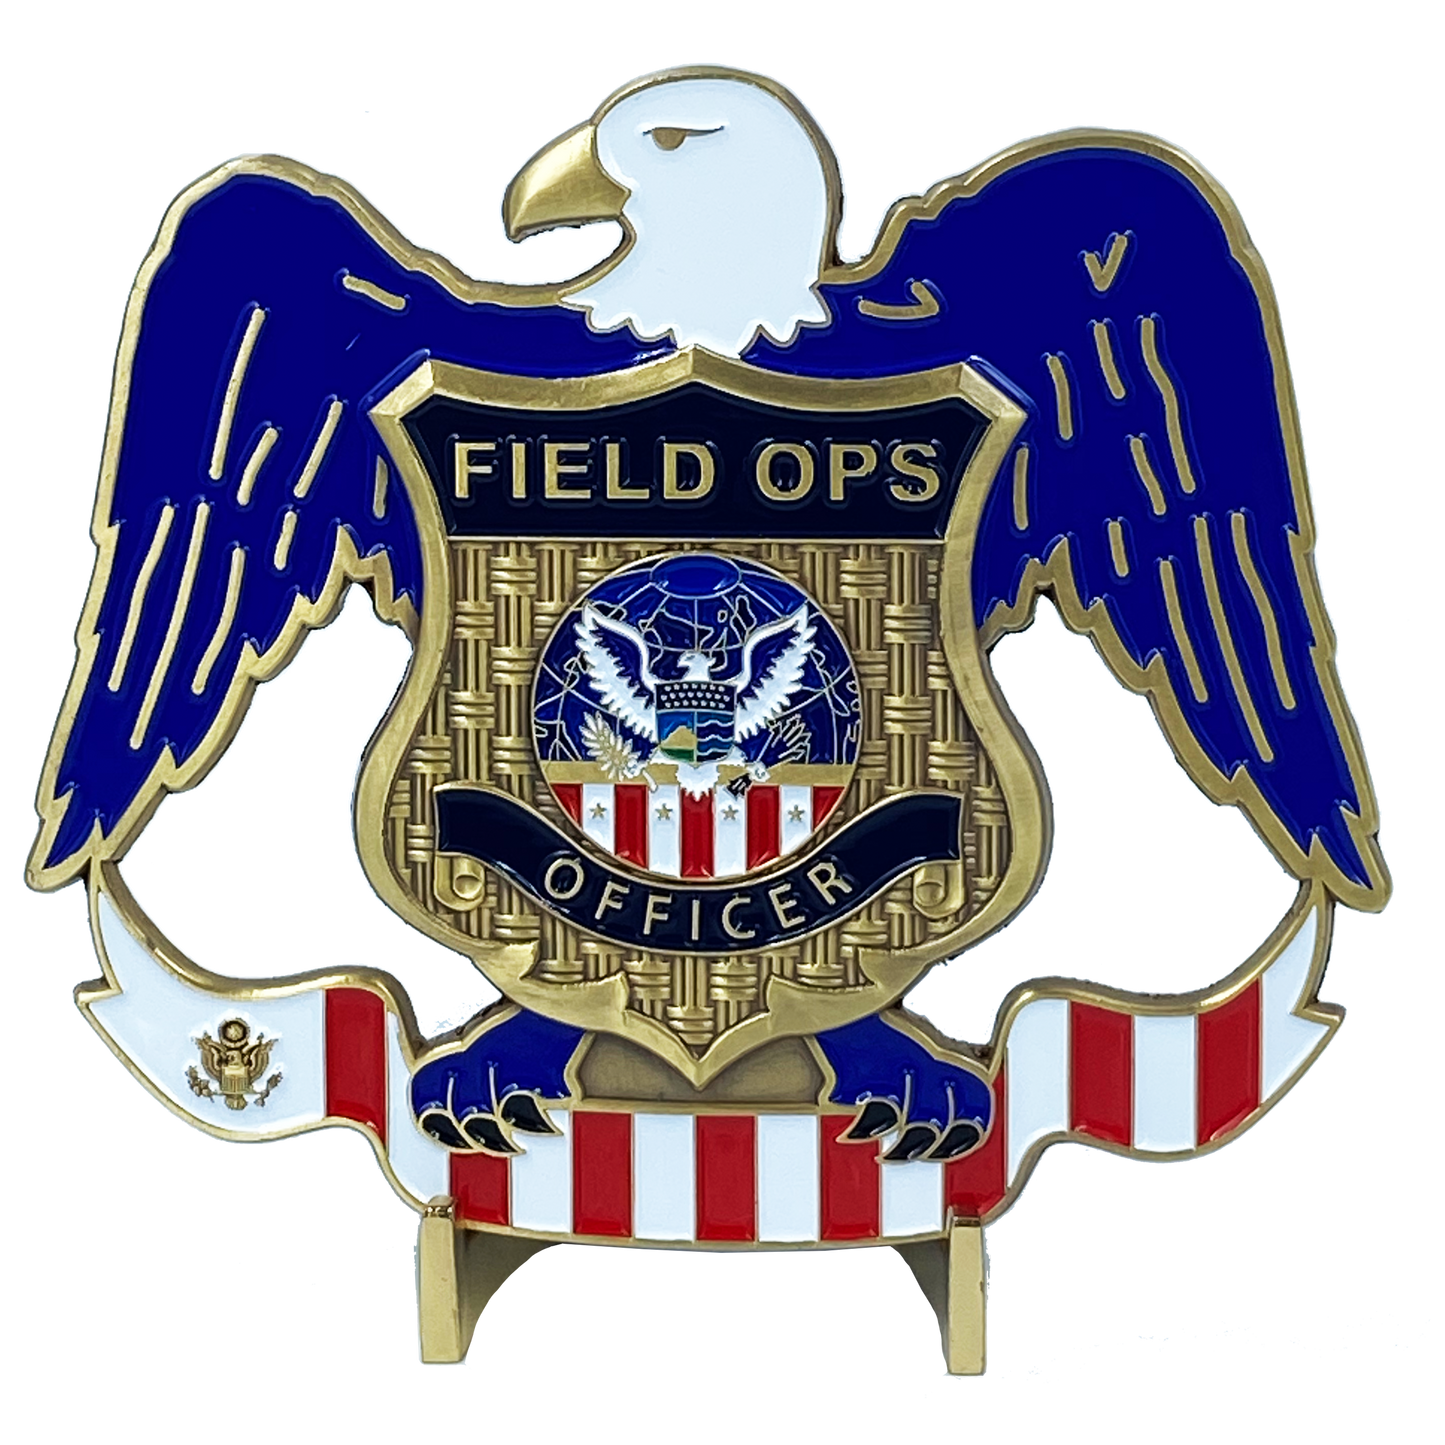 DL11-10 Field Operations huge vintage inspired CBP Field Ops US Customs Challenge Coin Eagle Flag 4 inch